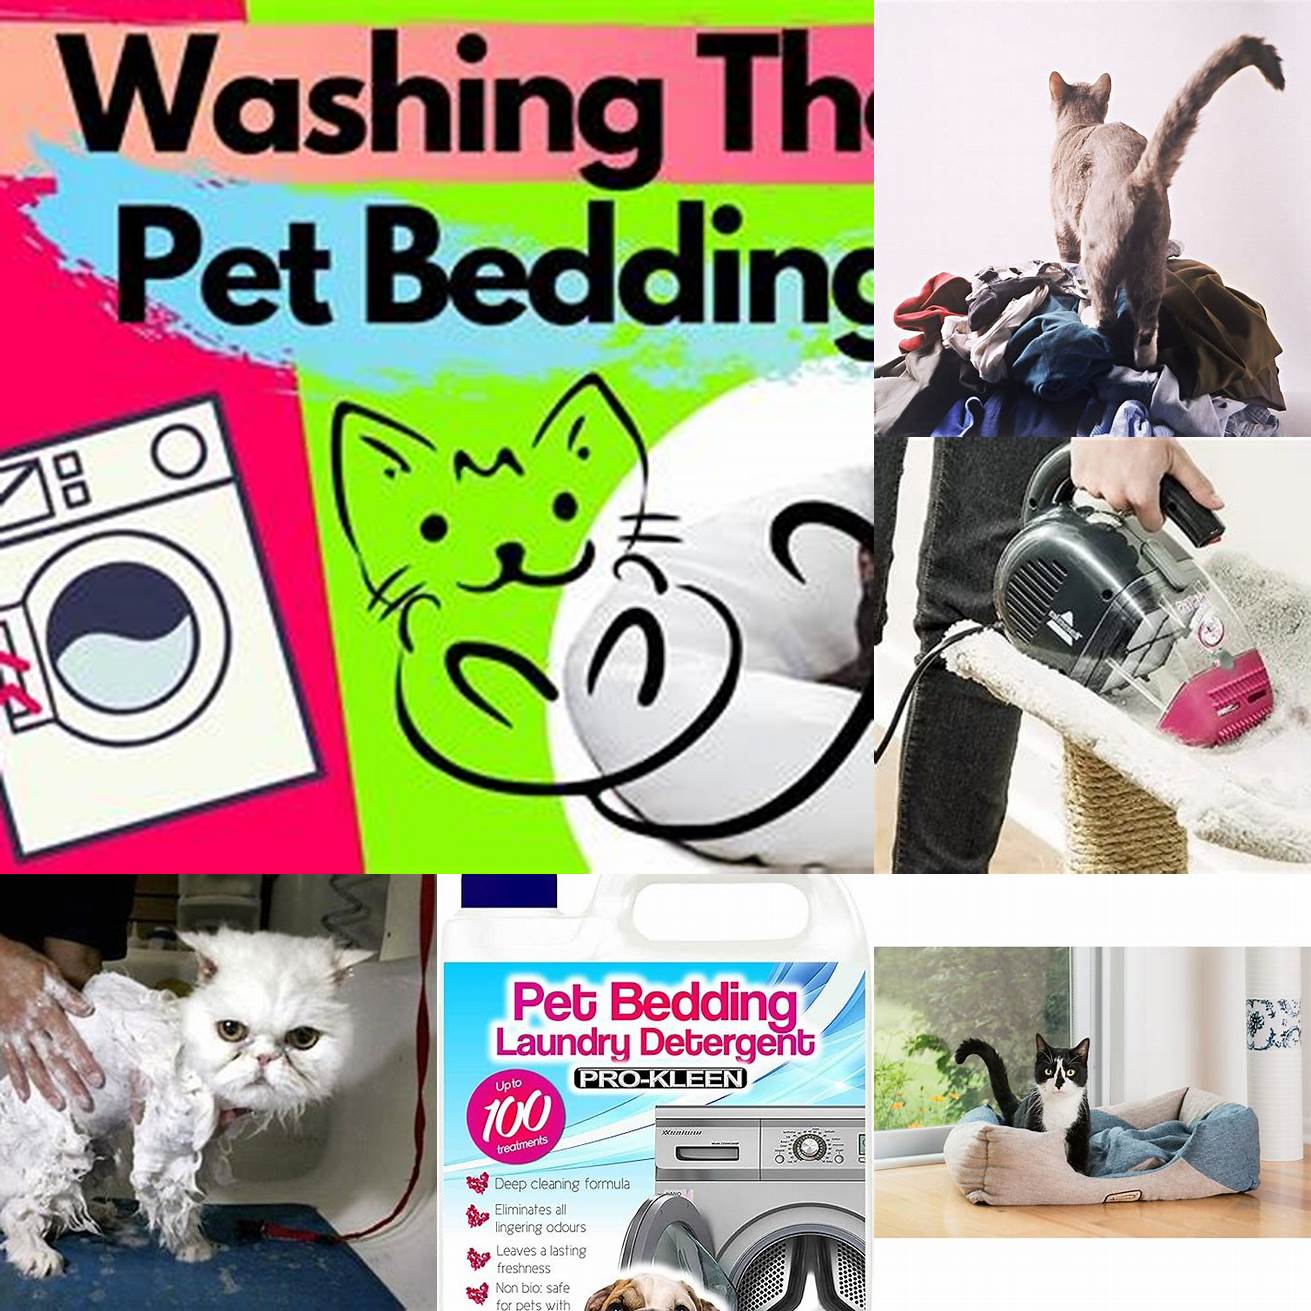 Wash clothes and bedding